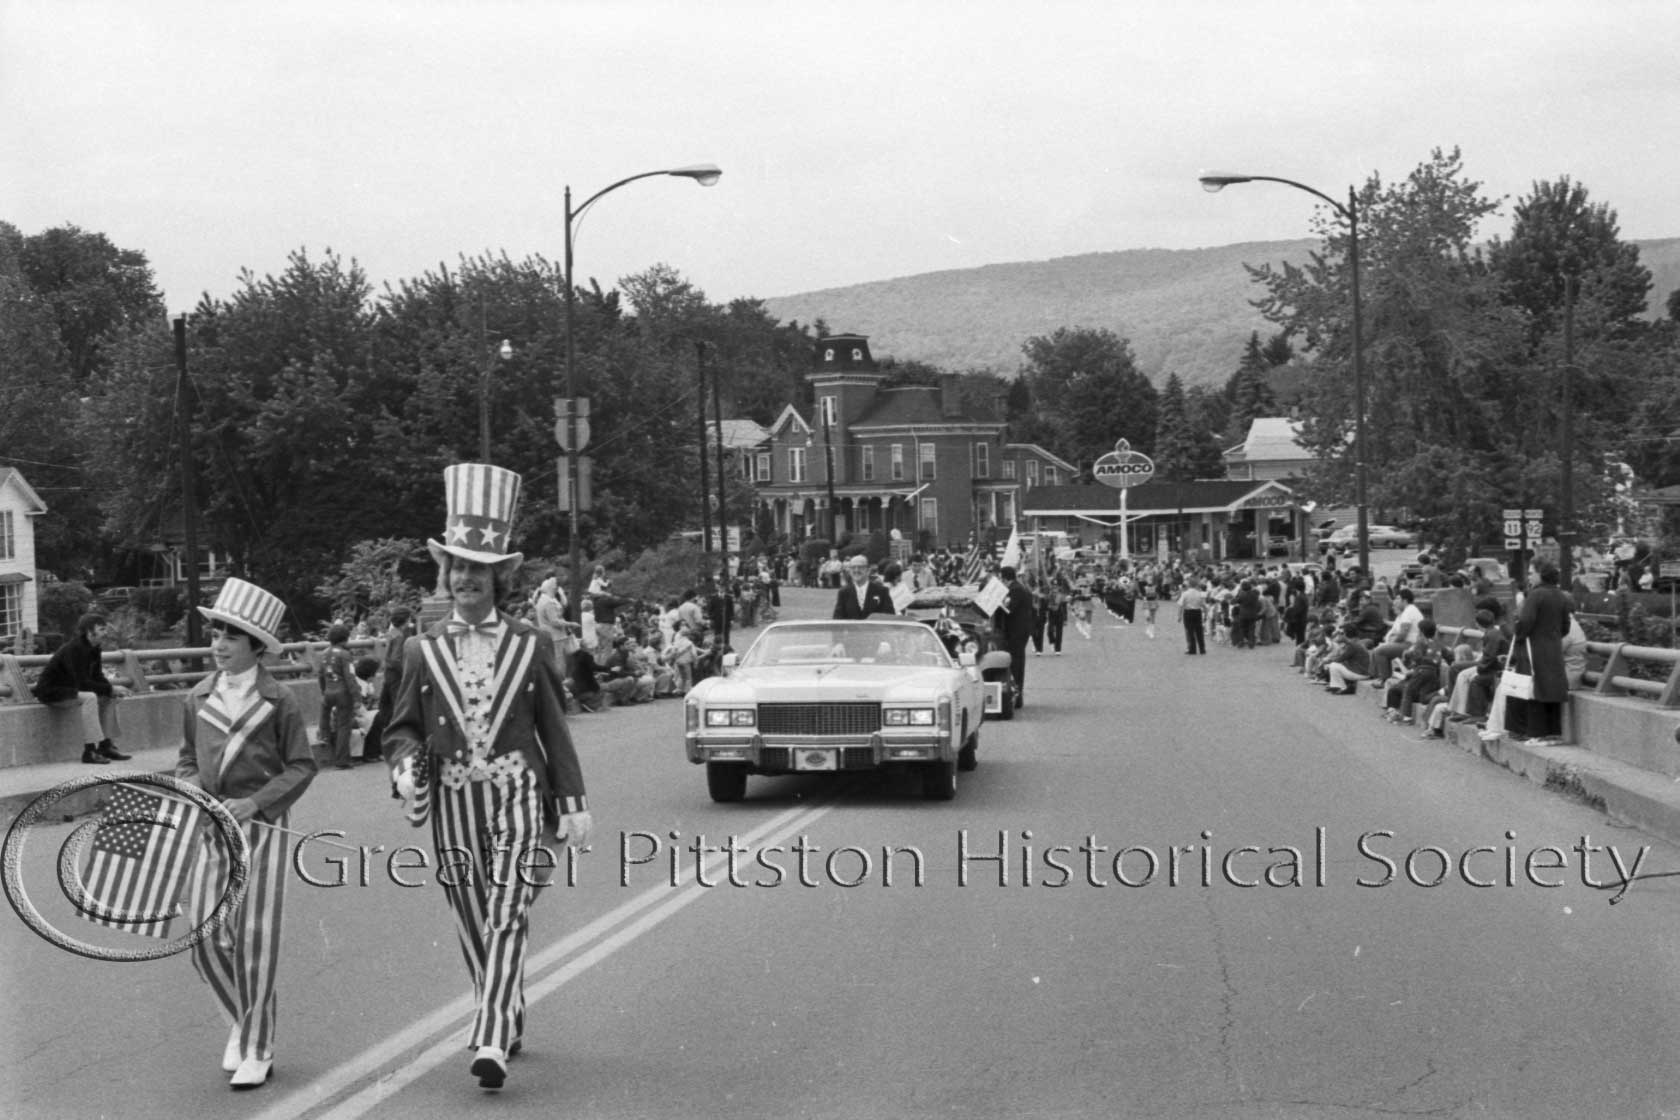 P. J. Melvin marching in Pittston's parade to mark the American Bicentennial, 1976. Sunday Dispatch Photographic Collection (1976.1.0222), Greater Pittston Historical Society, Pittston, PA.